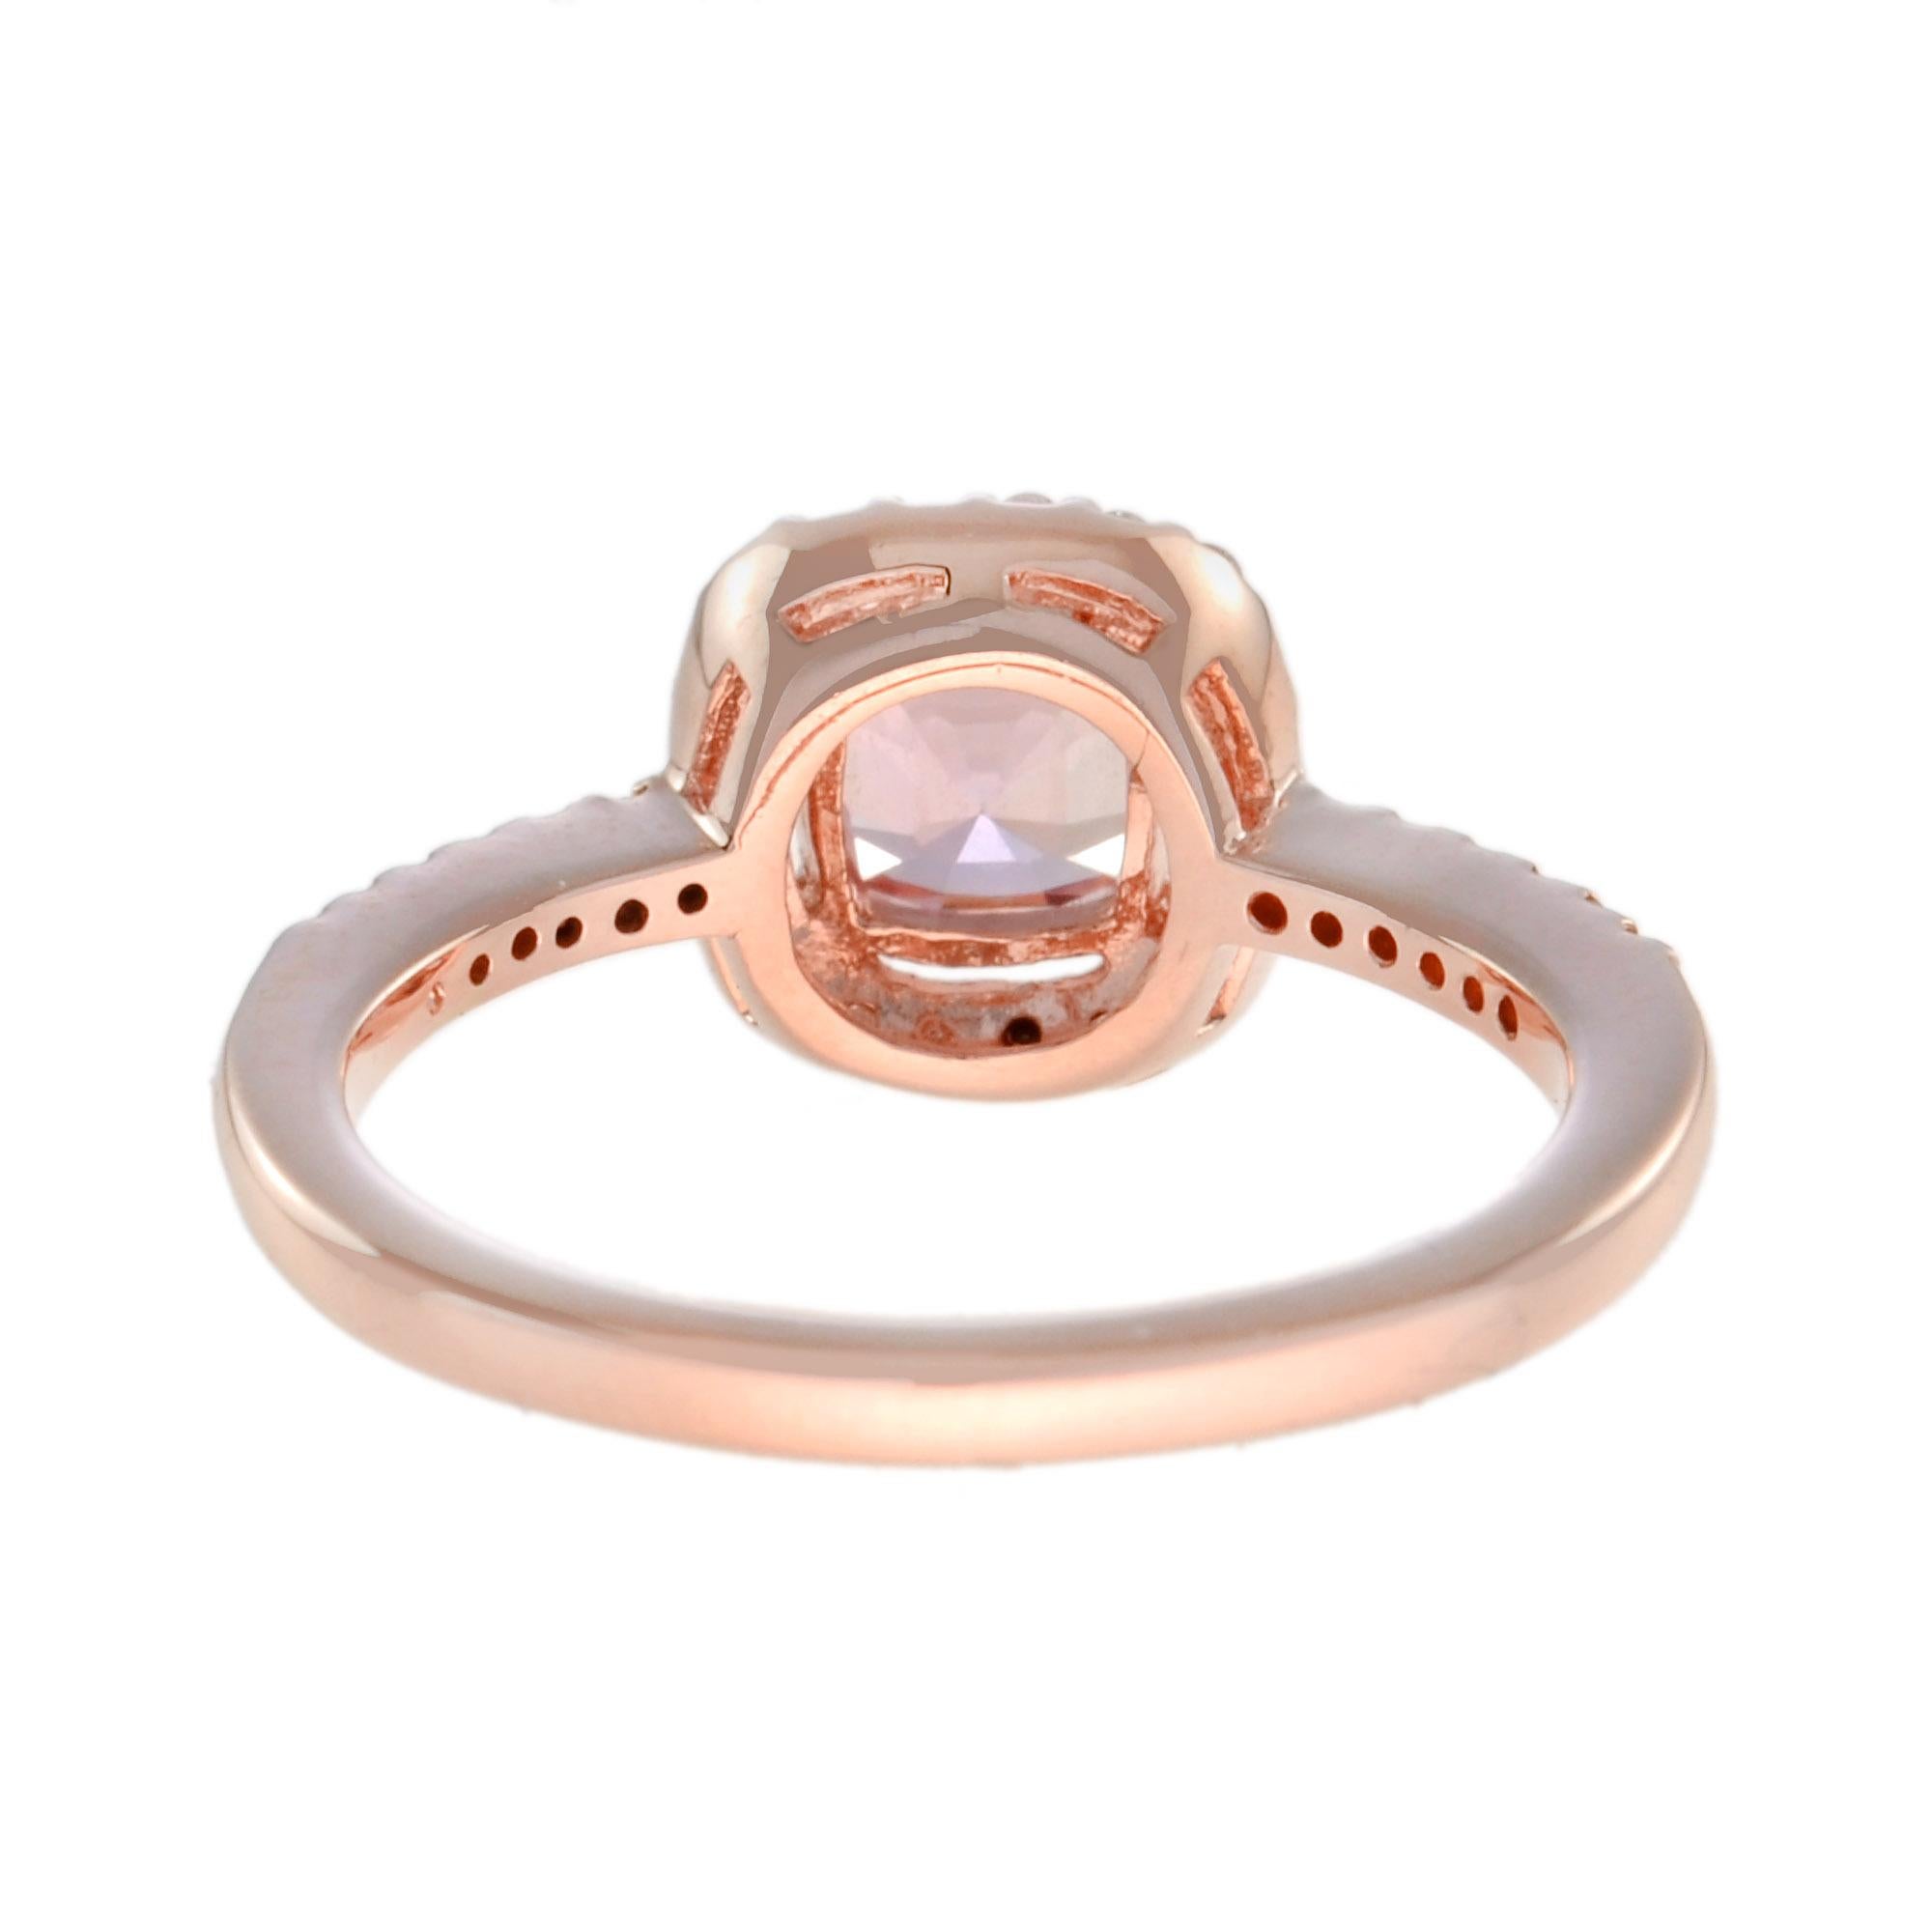 For Sale:  Halona Cushion Morganite and Diamond Halo Ring in 14K Rose Gold 4